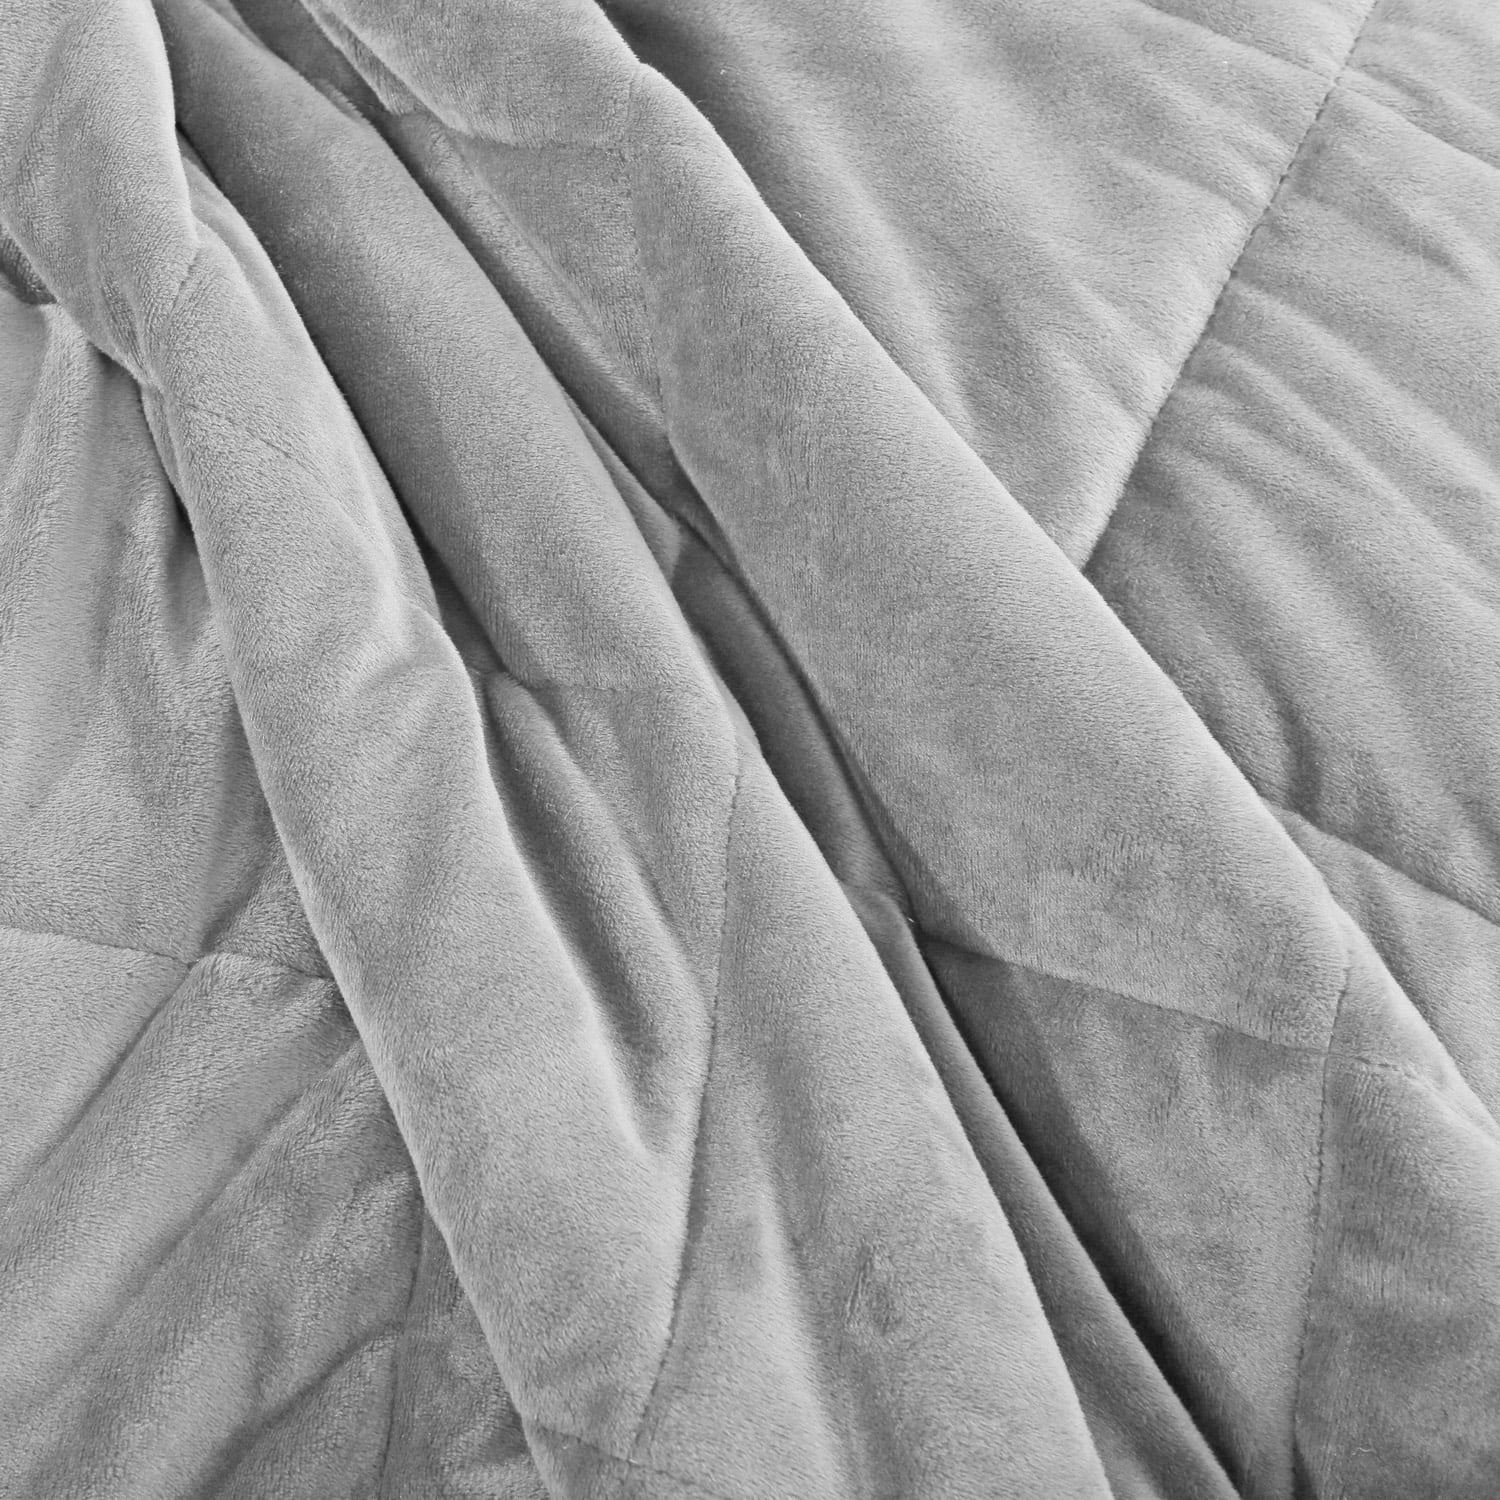 Sedona House 15lb Silky Velvet Weighted Blanket, Reversible & Machine Washable blanket, Grey Color 48X72 Twin Size